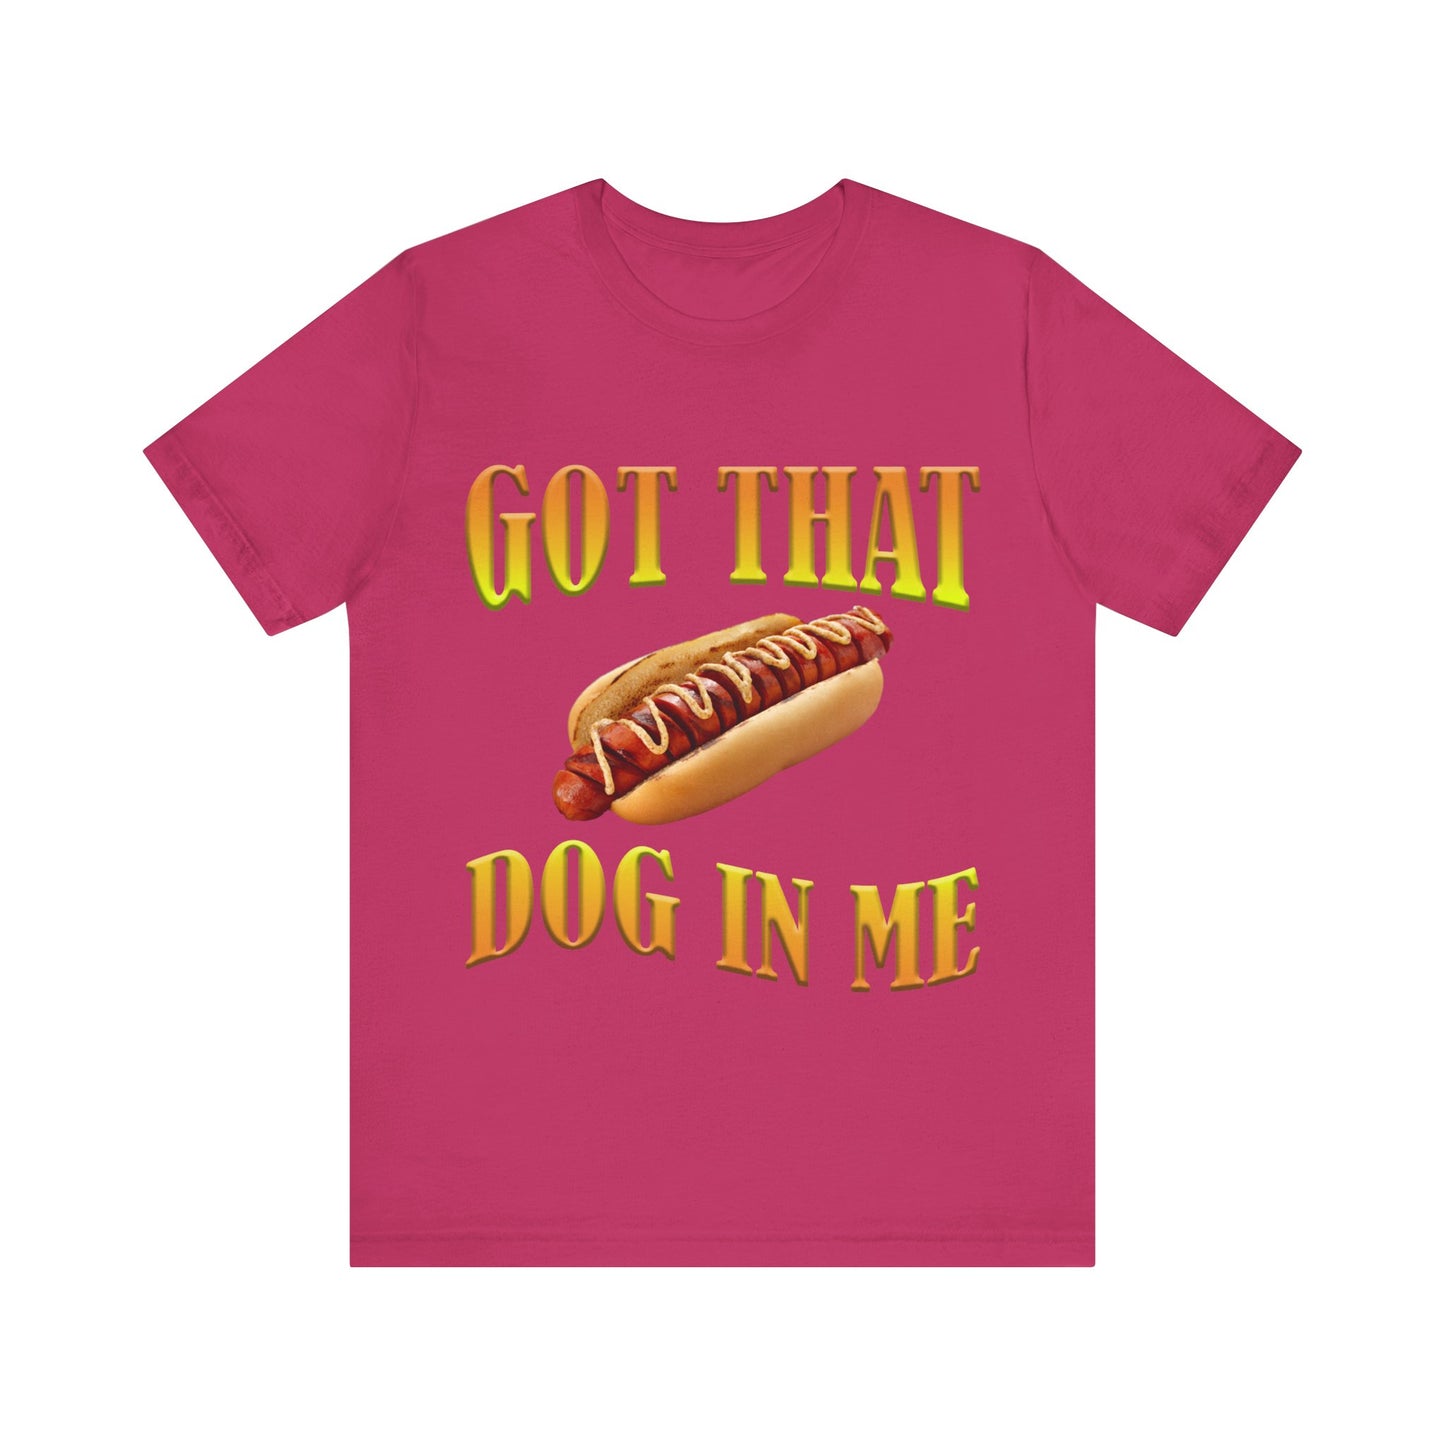 Got that dog in me Tee